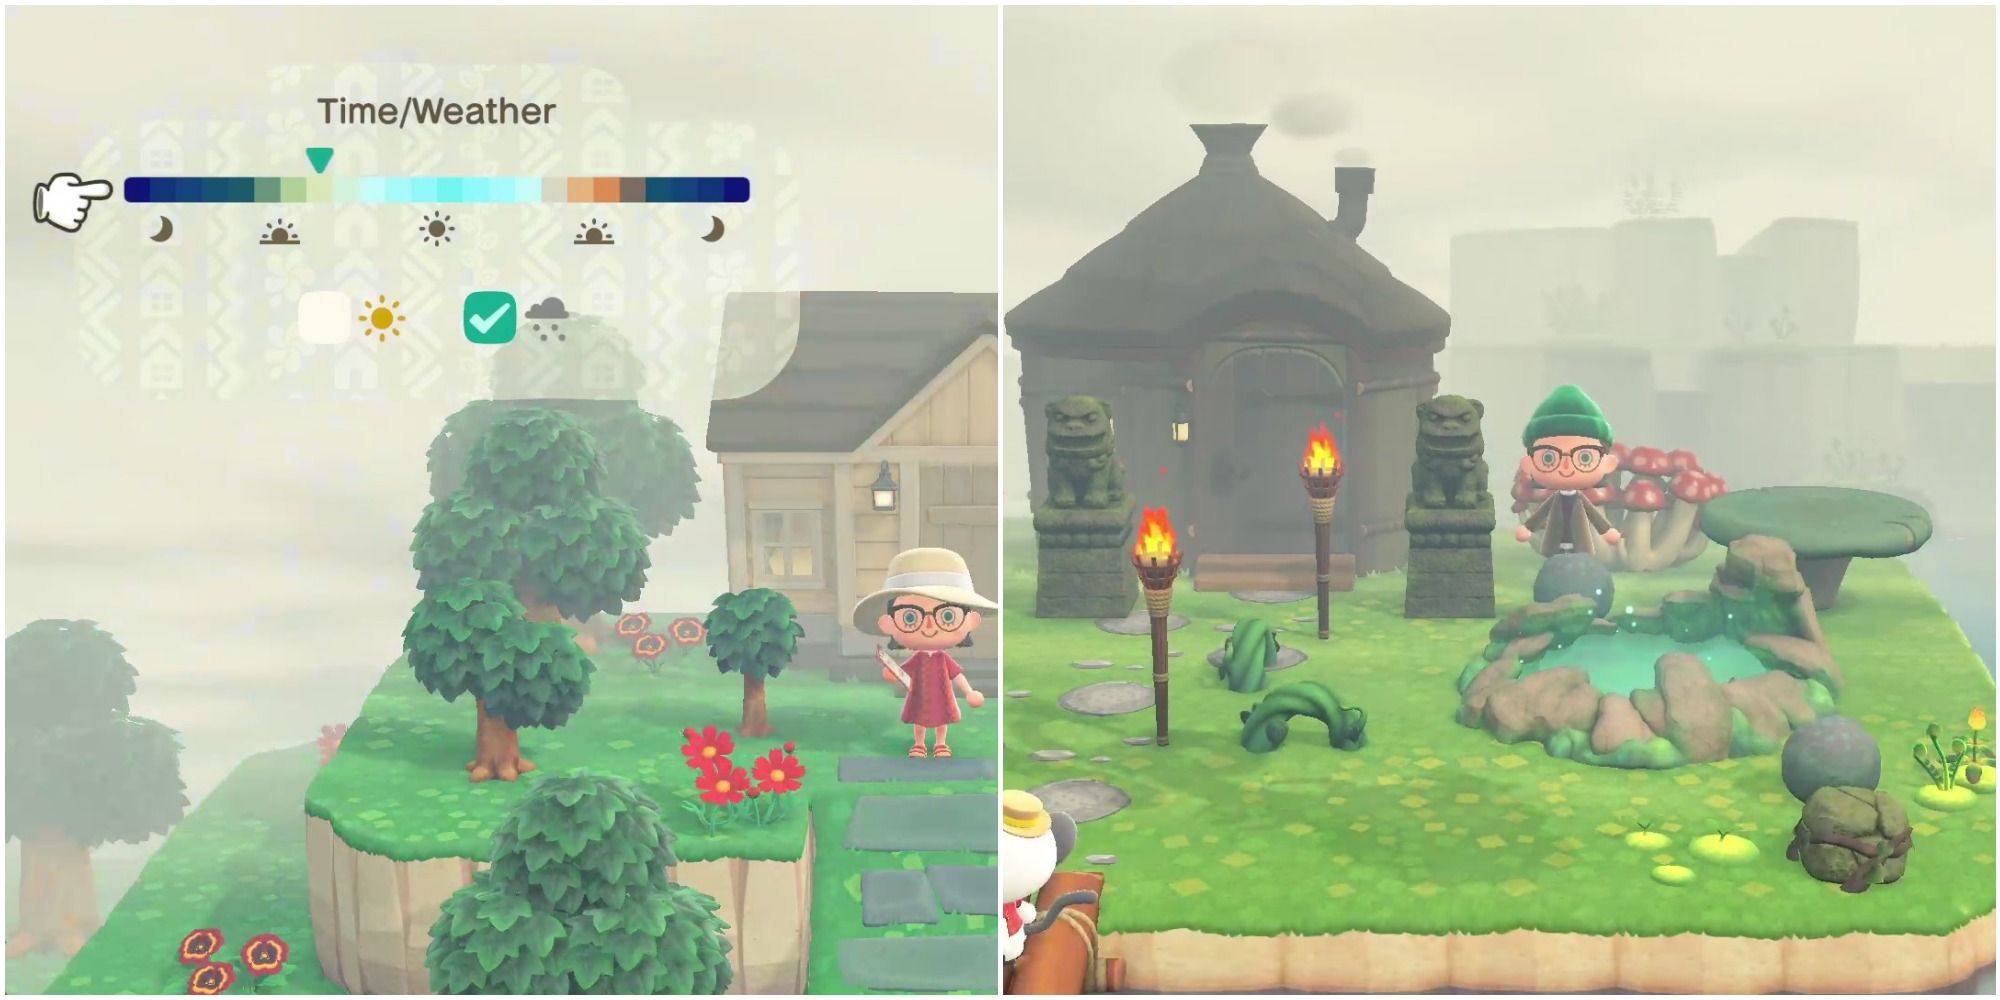 A split image from left to right: A player cycles through different times of day with the Time/Weather feature, and a player stands in a swampy area surrounded by fog